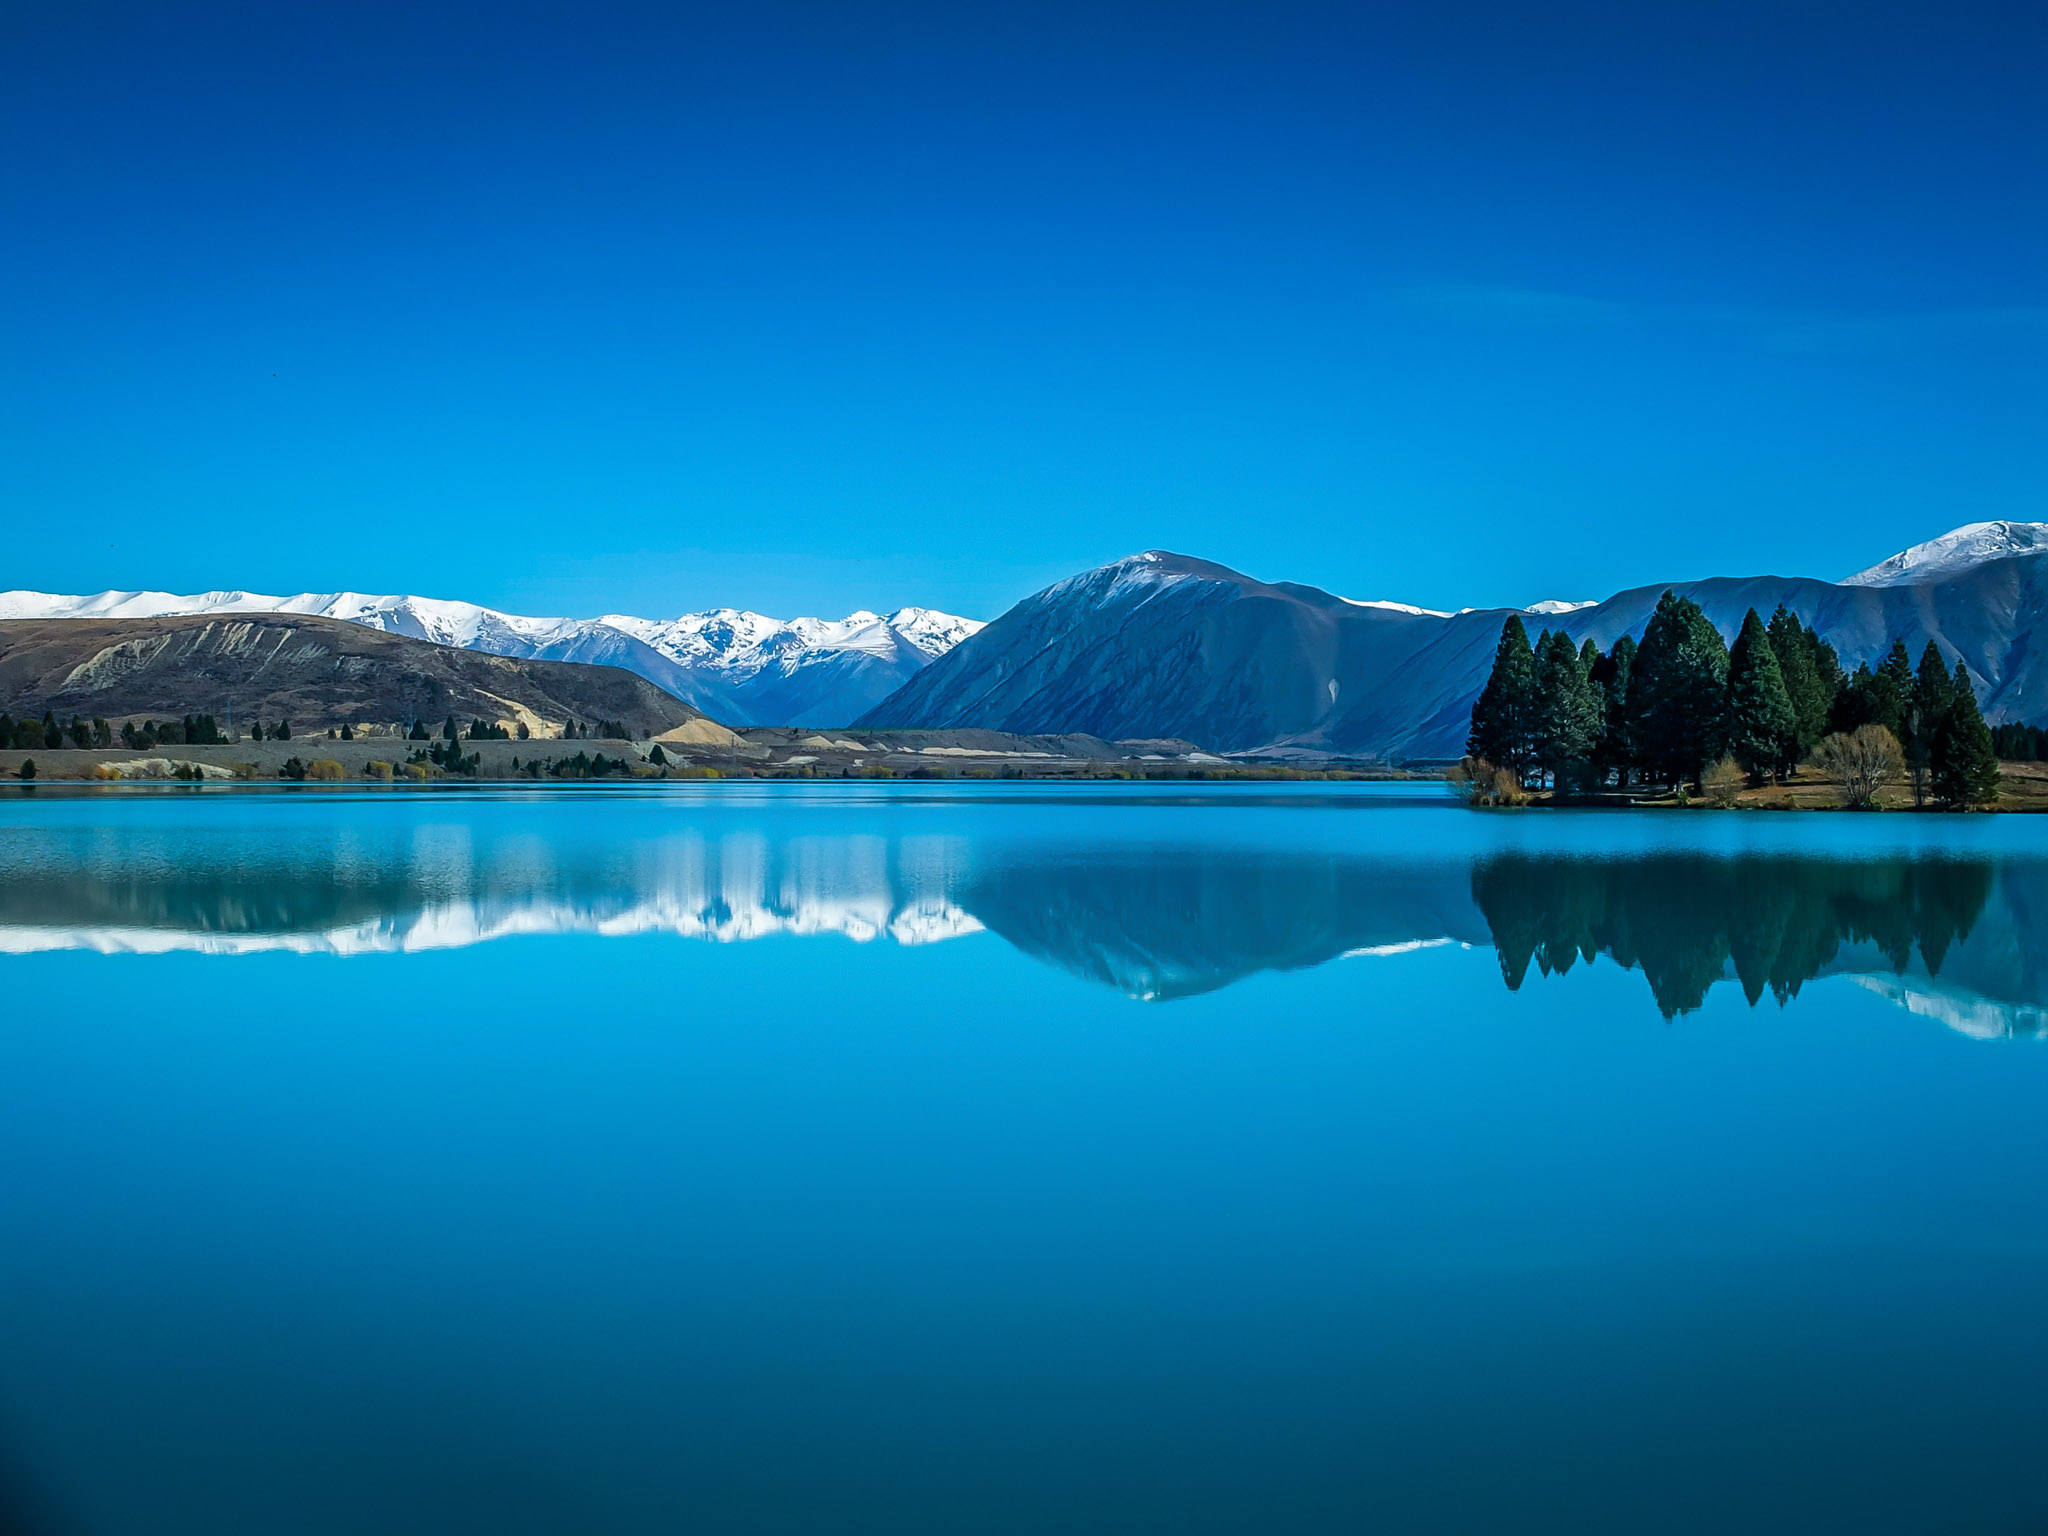 5-pictures-my-favorites-from-new-zealand-andy-s-travel-blog